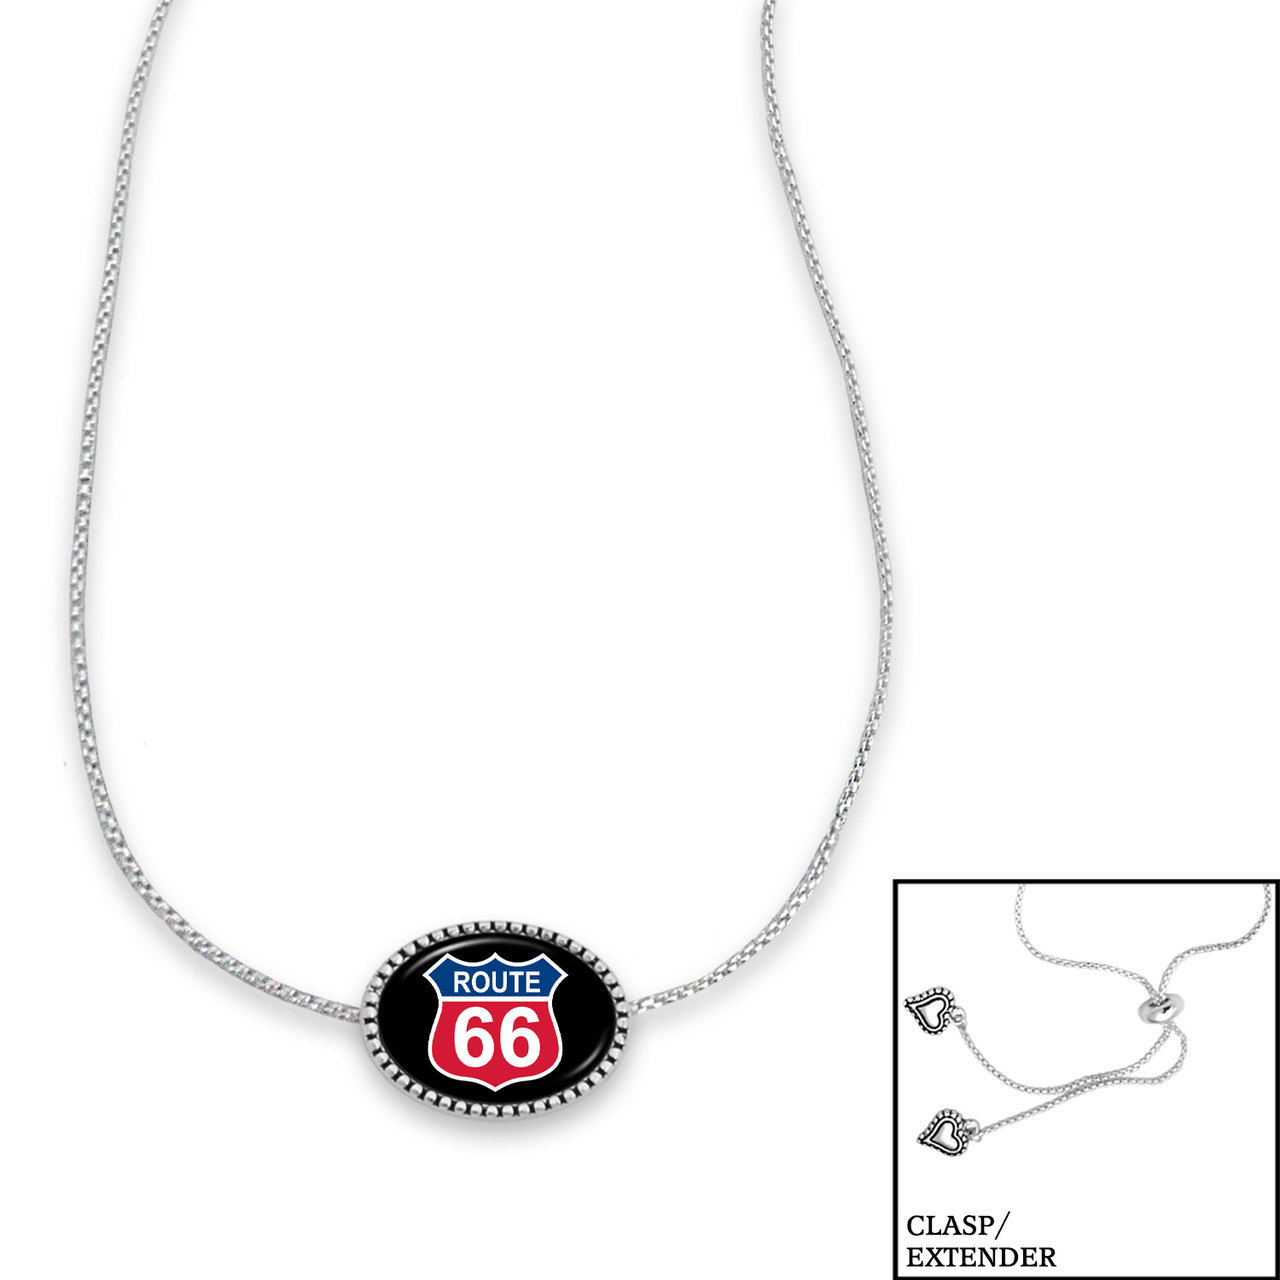 Route 66 Kennedy Necklace